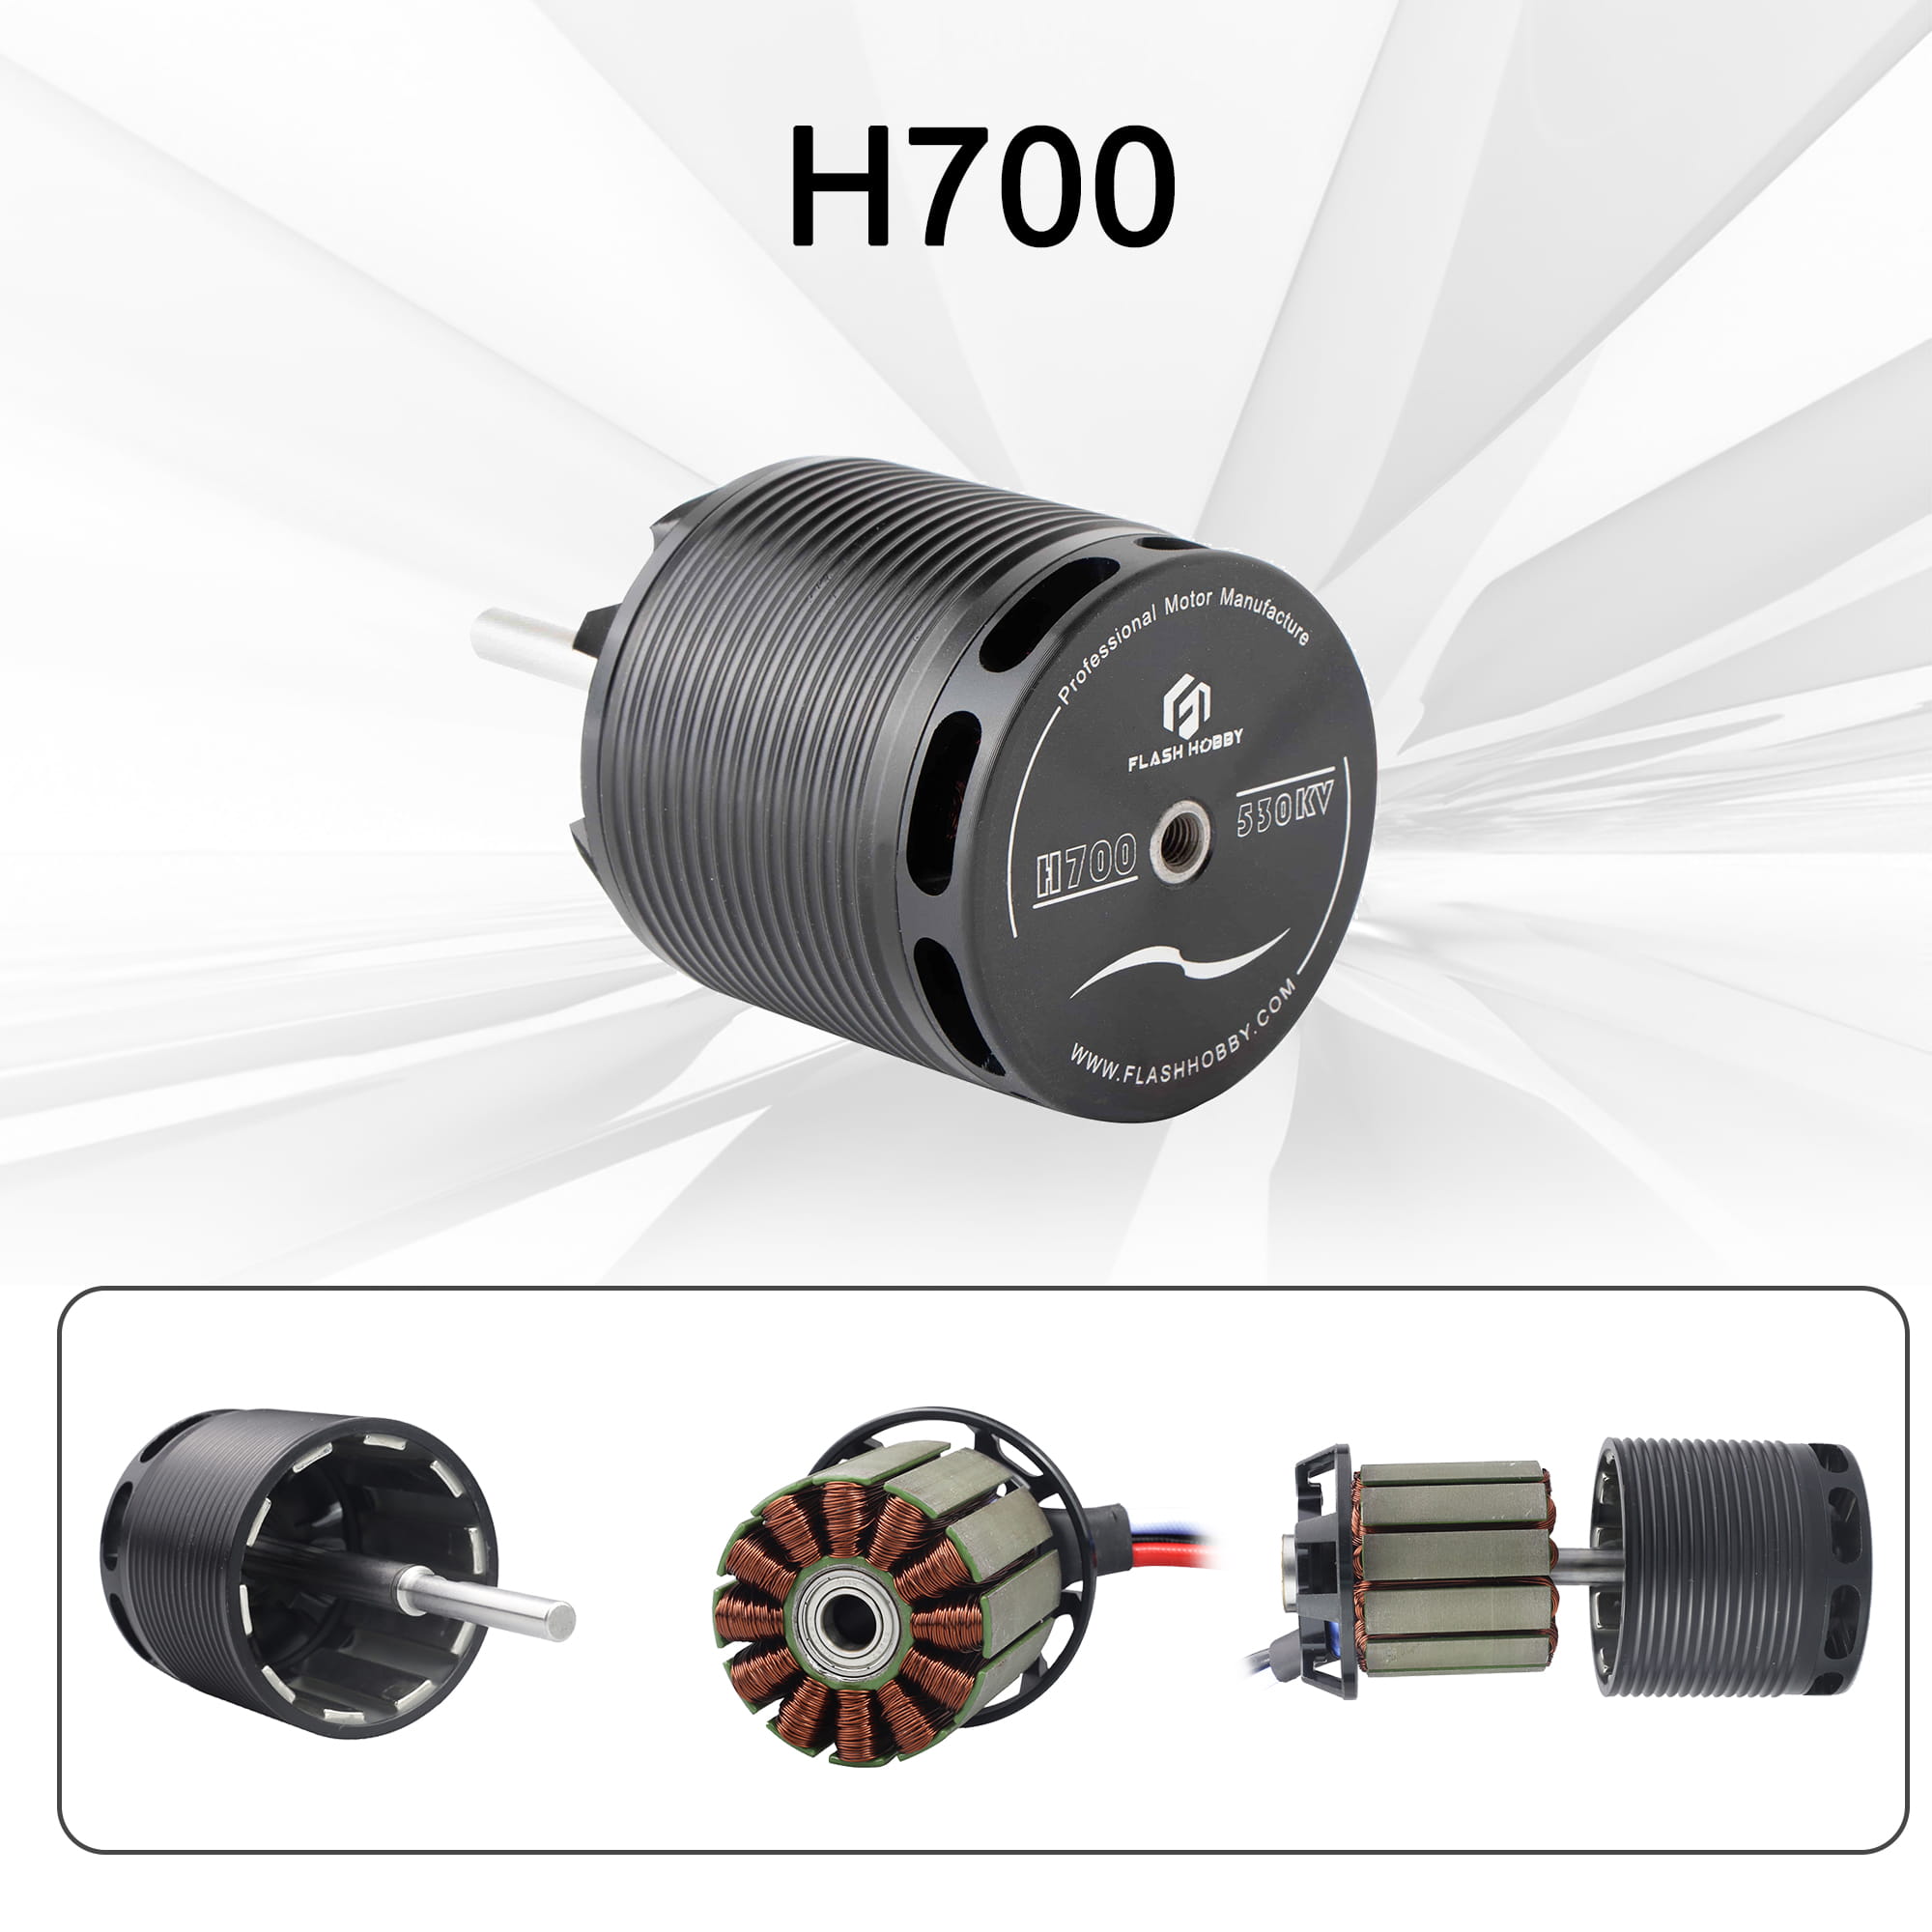 H700 Helicopter Motor Manufacturers and Suppliers - Flash Hobby